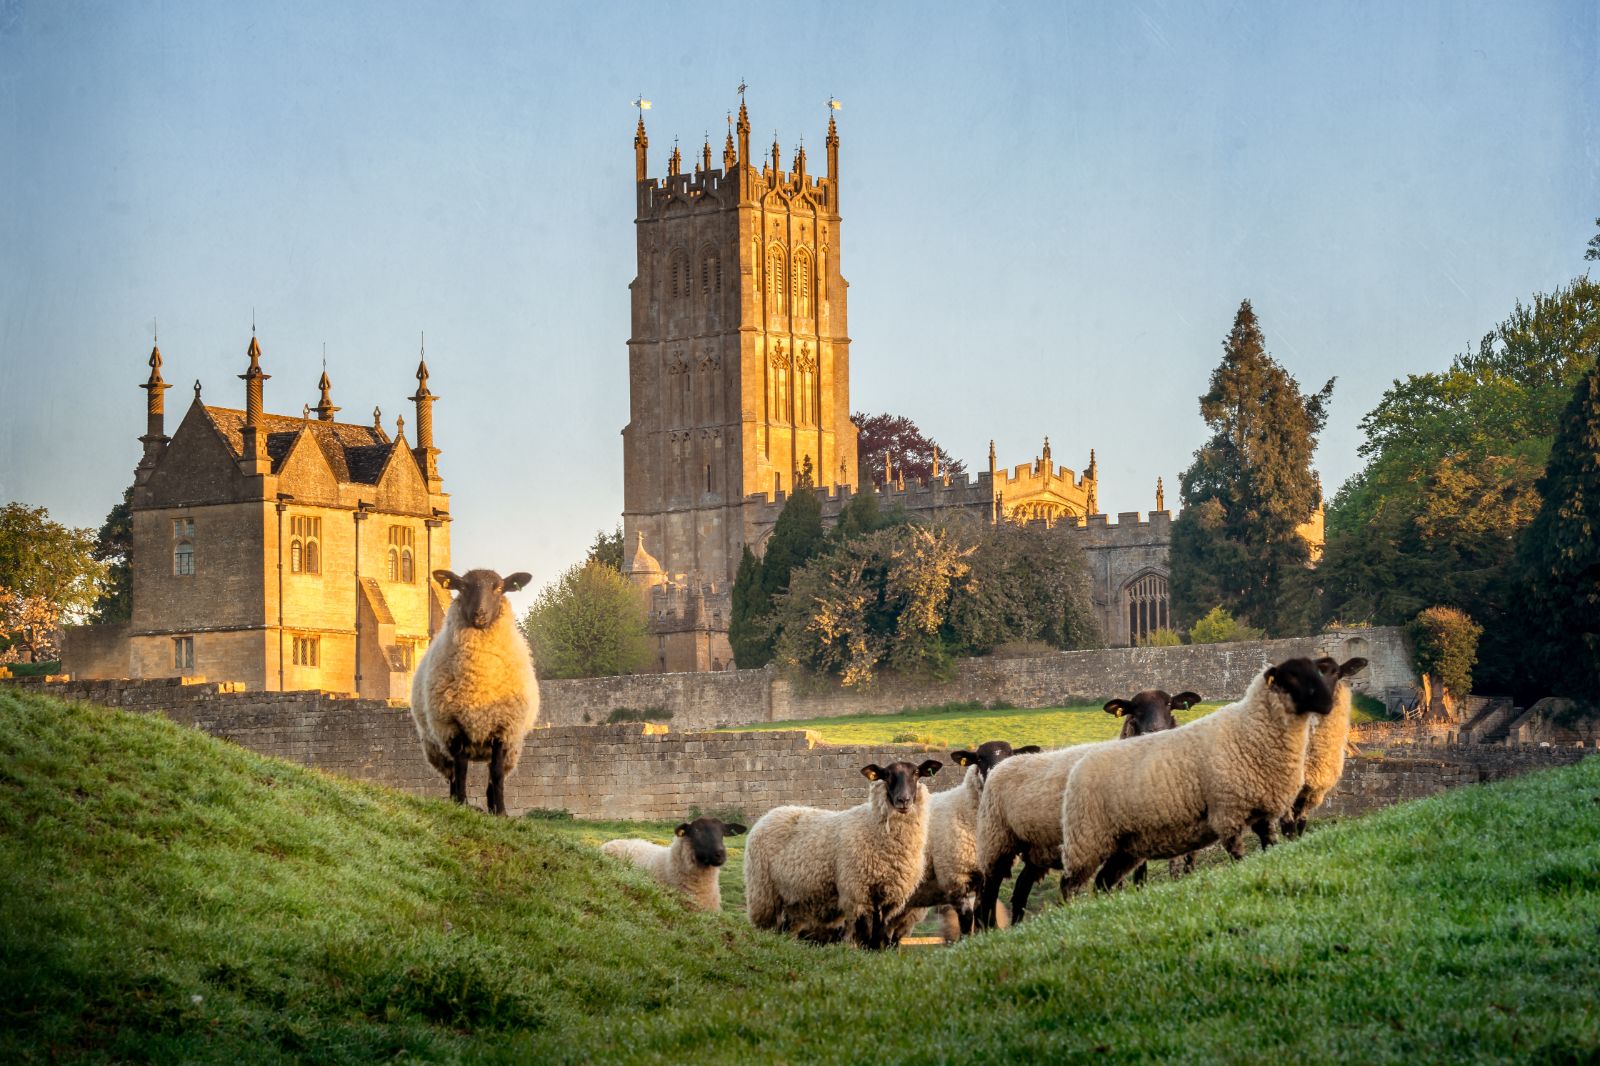 Sheep in Chipping Campden in the Cotswold, South West England